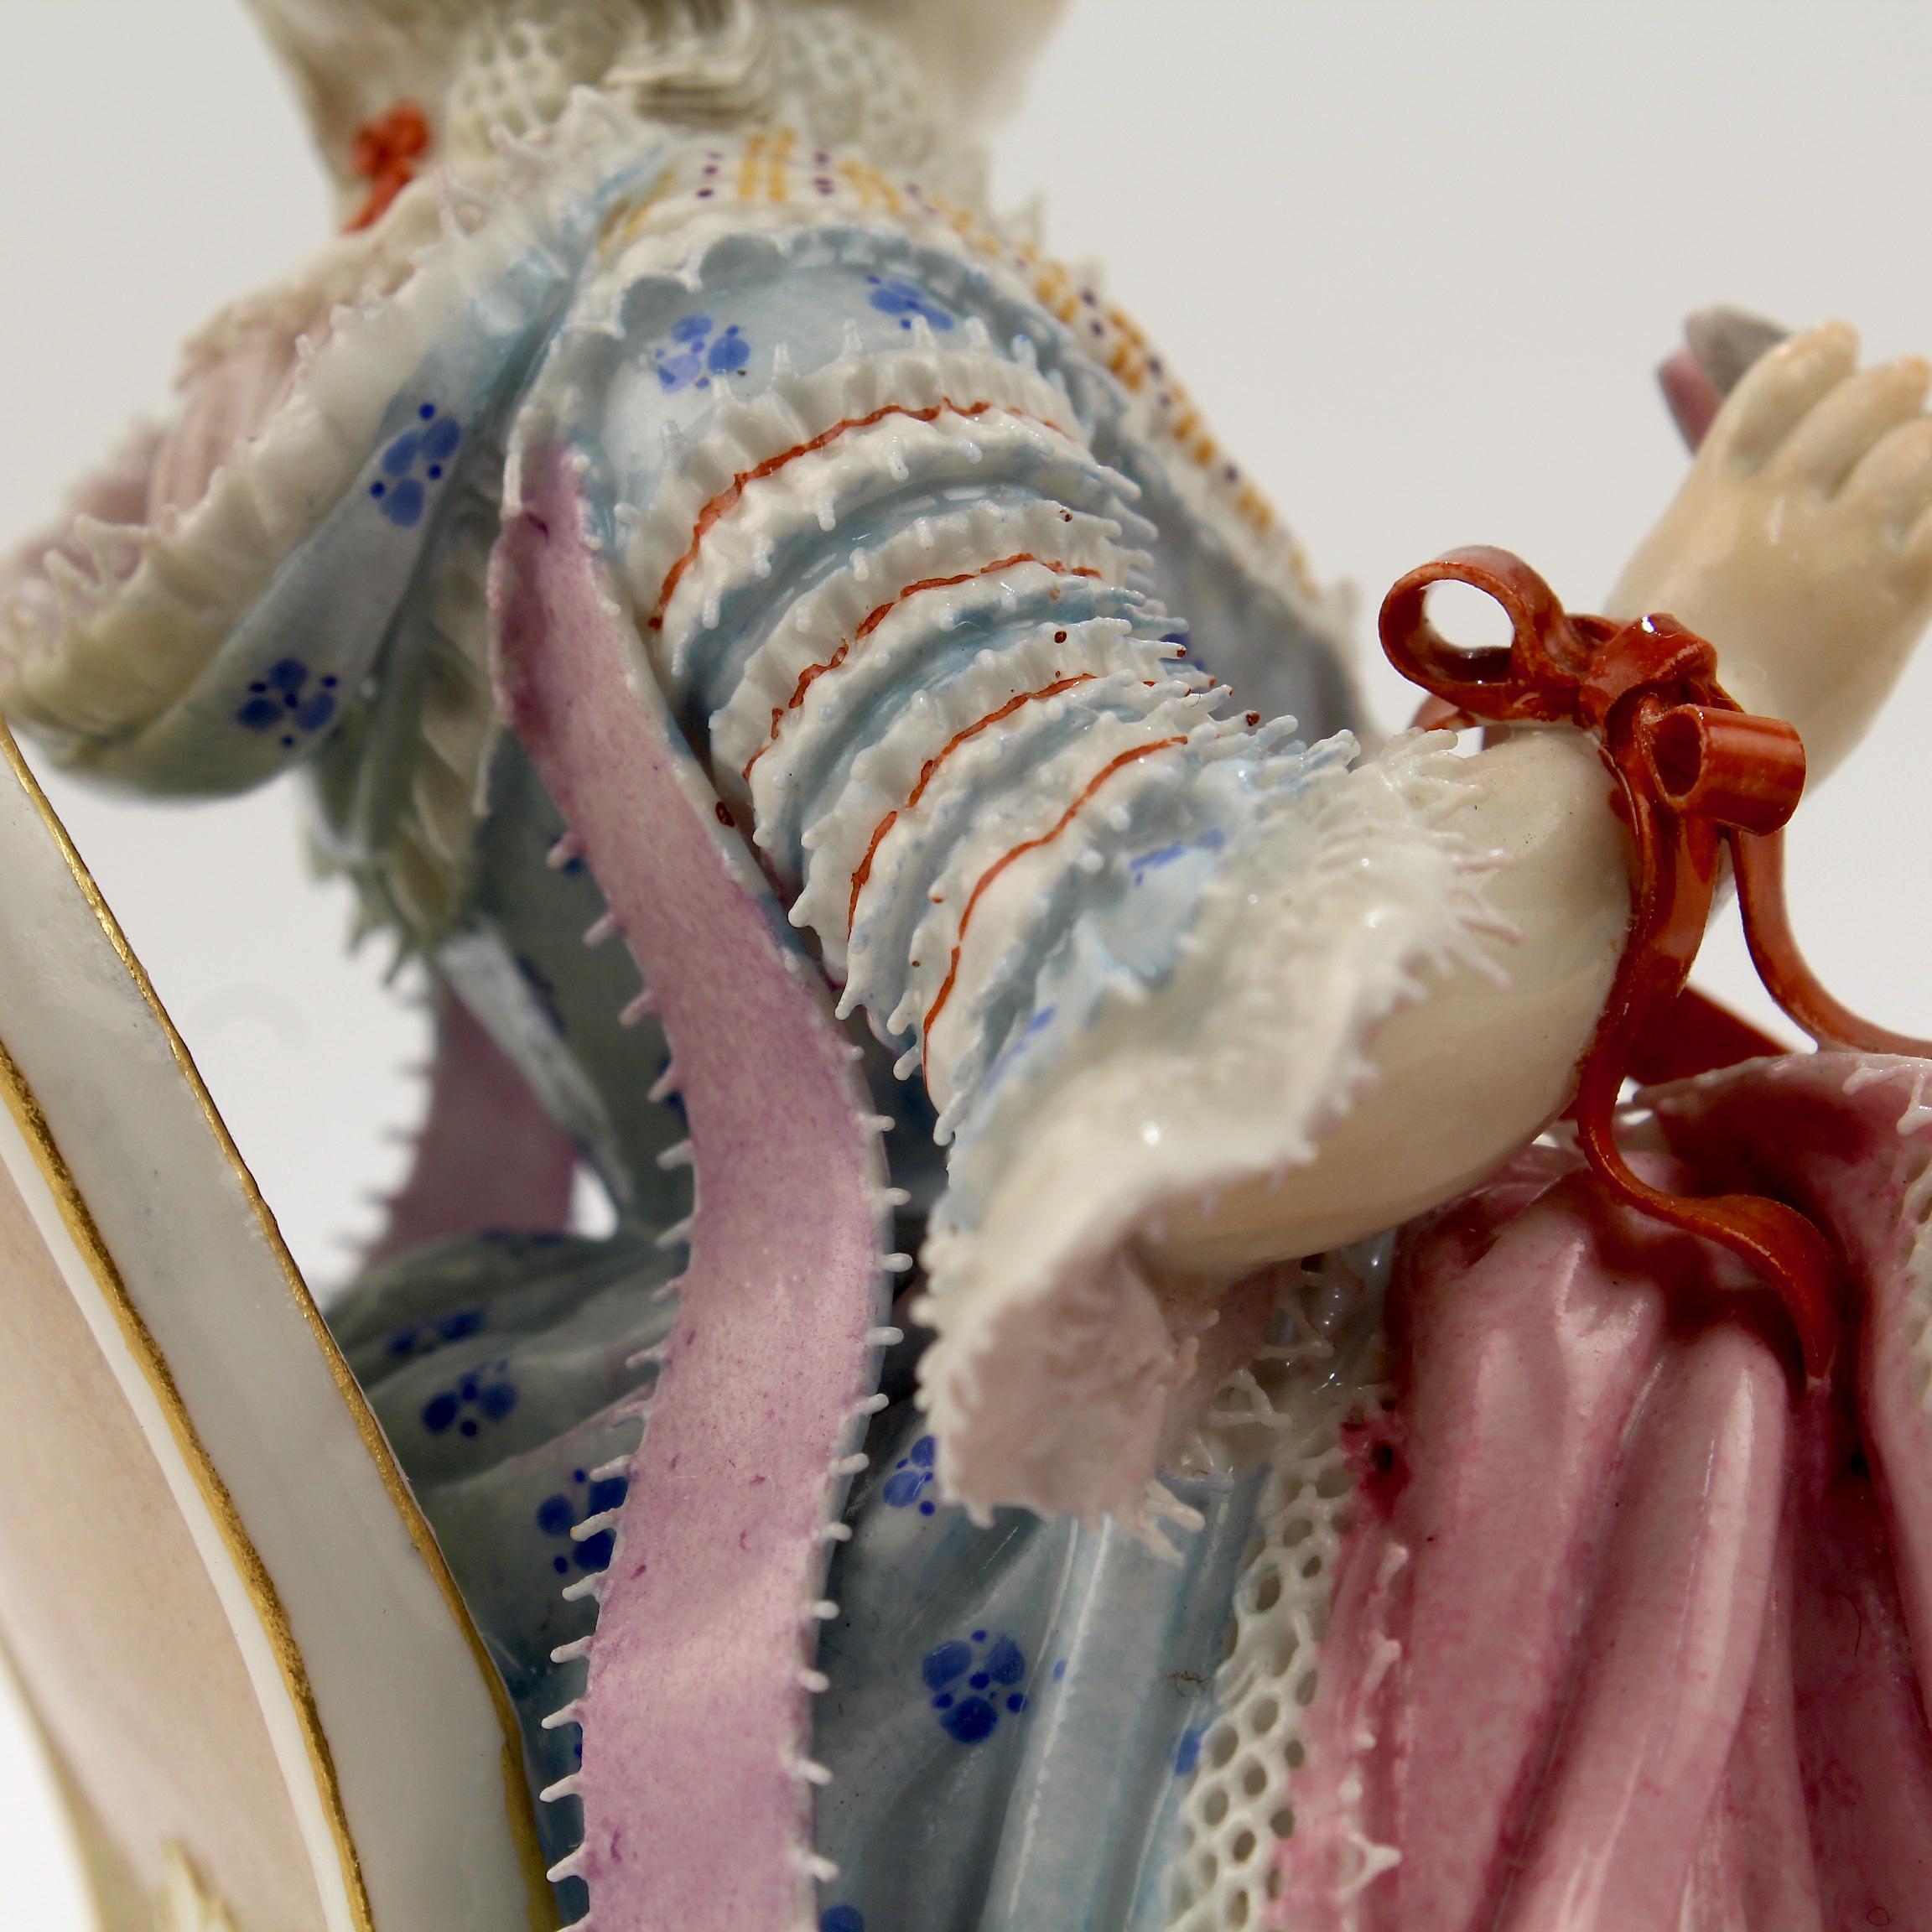 Antique Meissen Porcelain Figurine of a Girl with a Thread Winder Model No. C 28 6